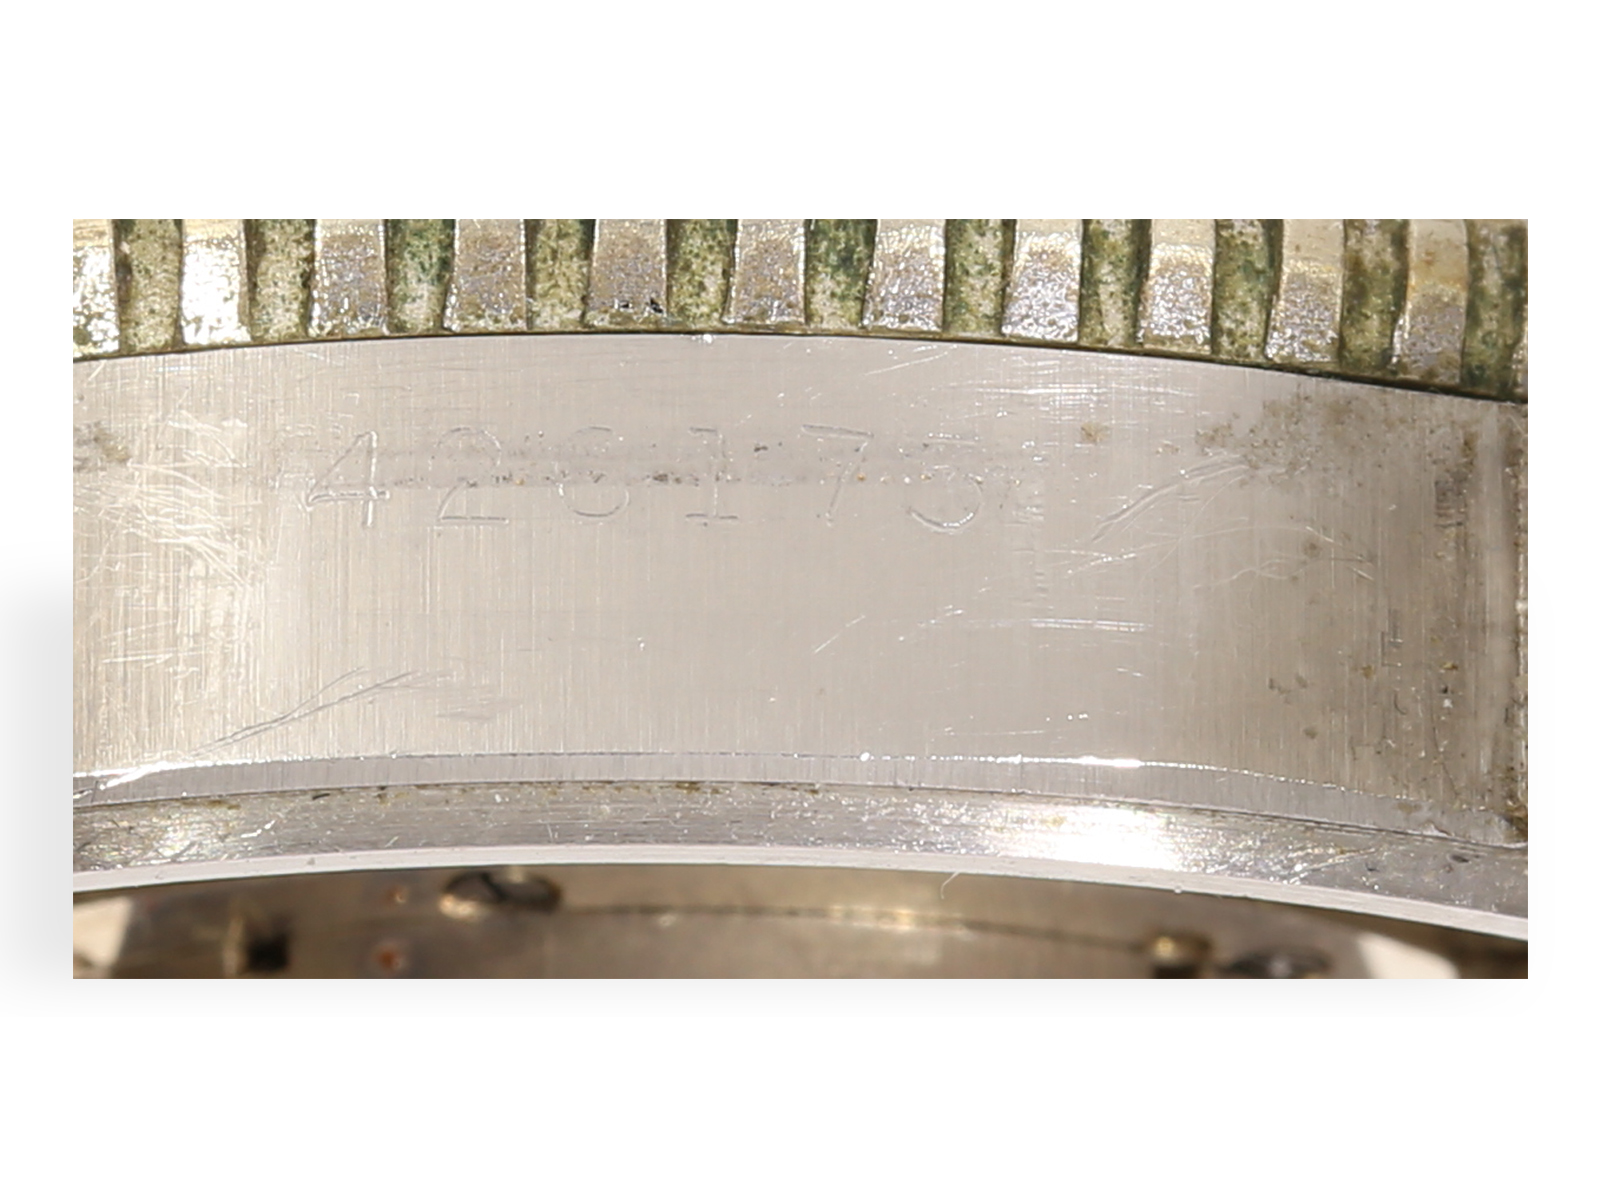 Wristwatch: extremely rare Rolex Submariner Ref. 6538 Big Crown-Four Liner, ca. 1958 - Image 8 of 9